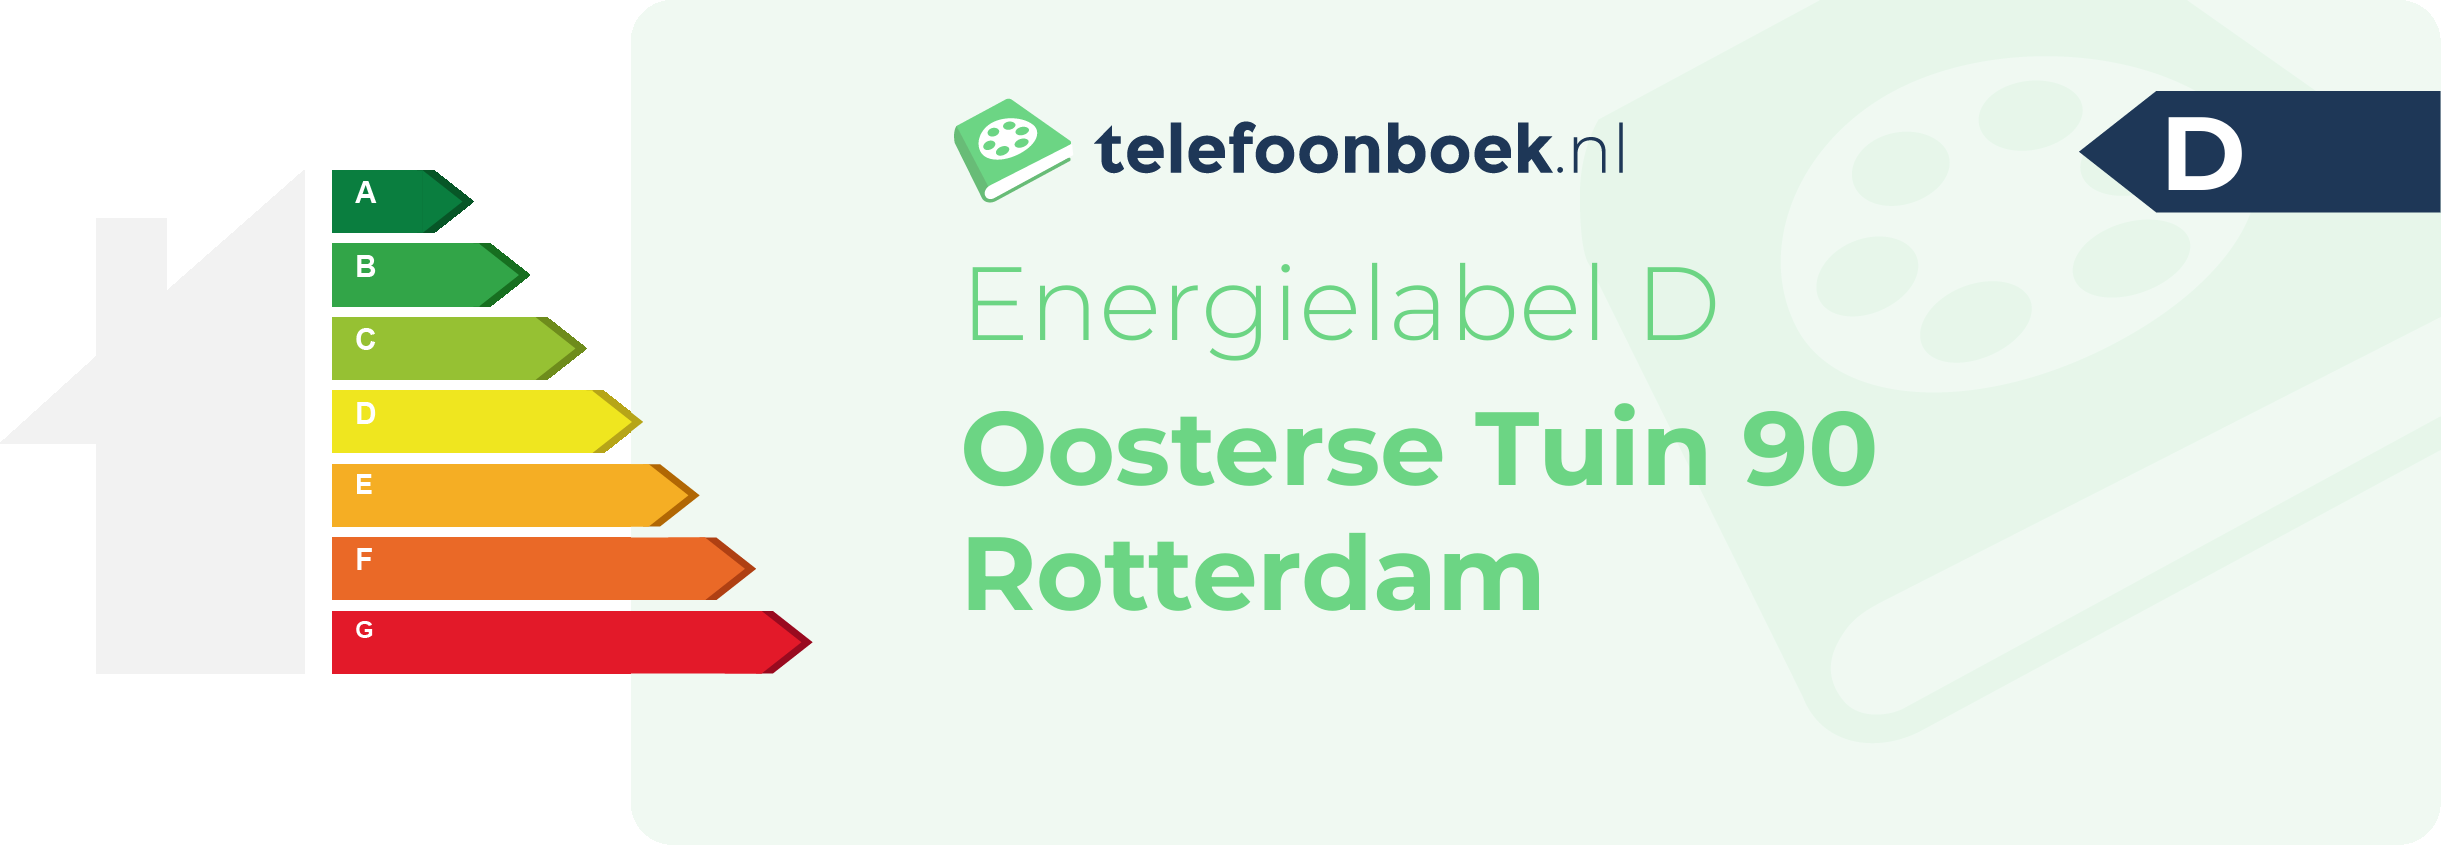 Energielabel Oosterse Tuin 90 Rotterdam